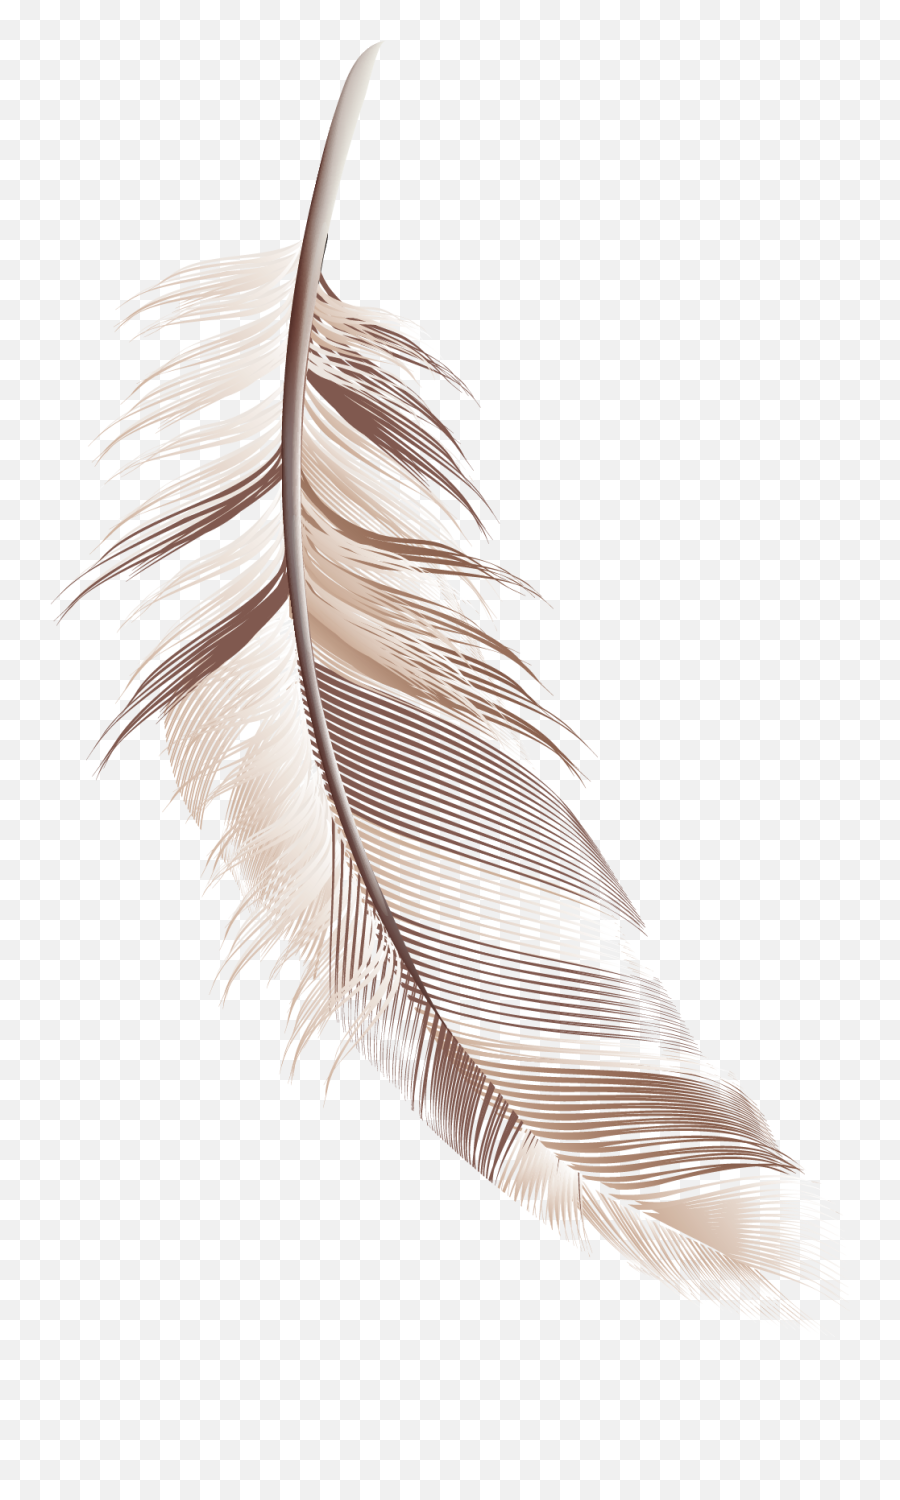 Free Transparent Feather Png Download - Feather Cartoon No Background Emoji,Feather Transparent Background